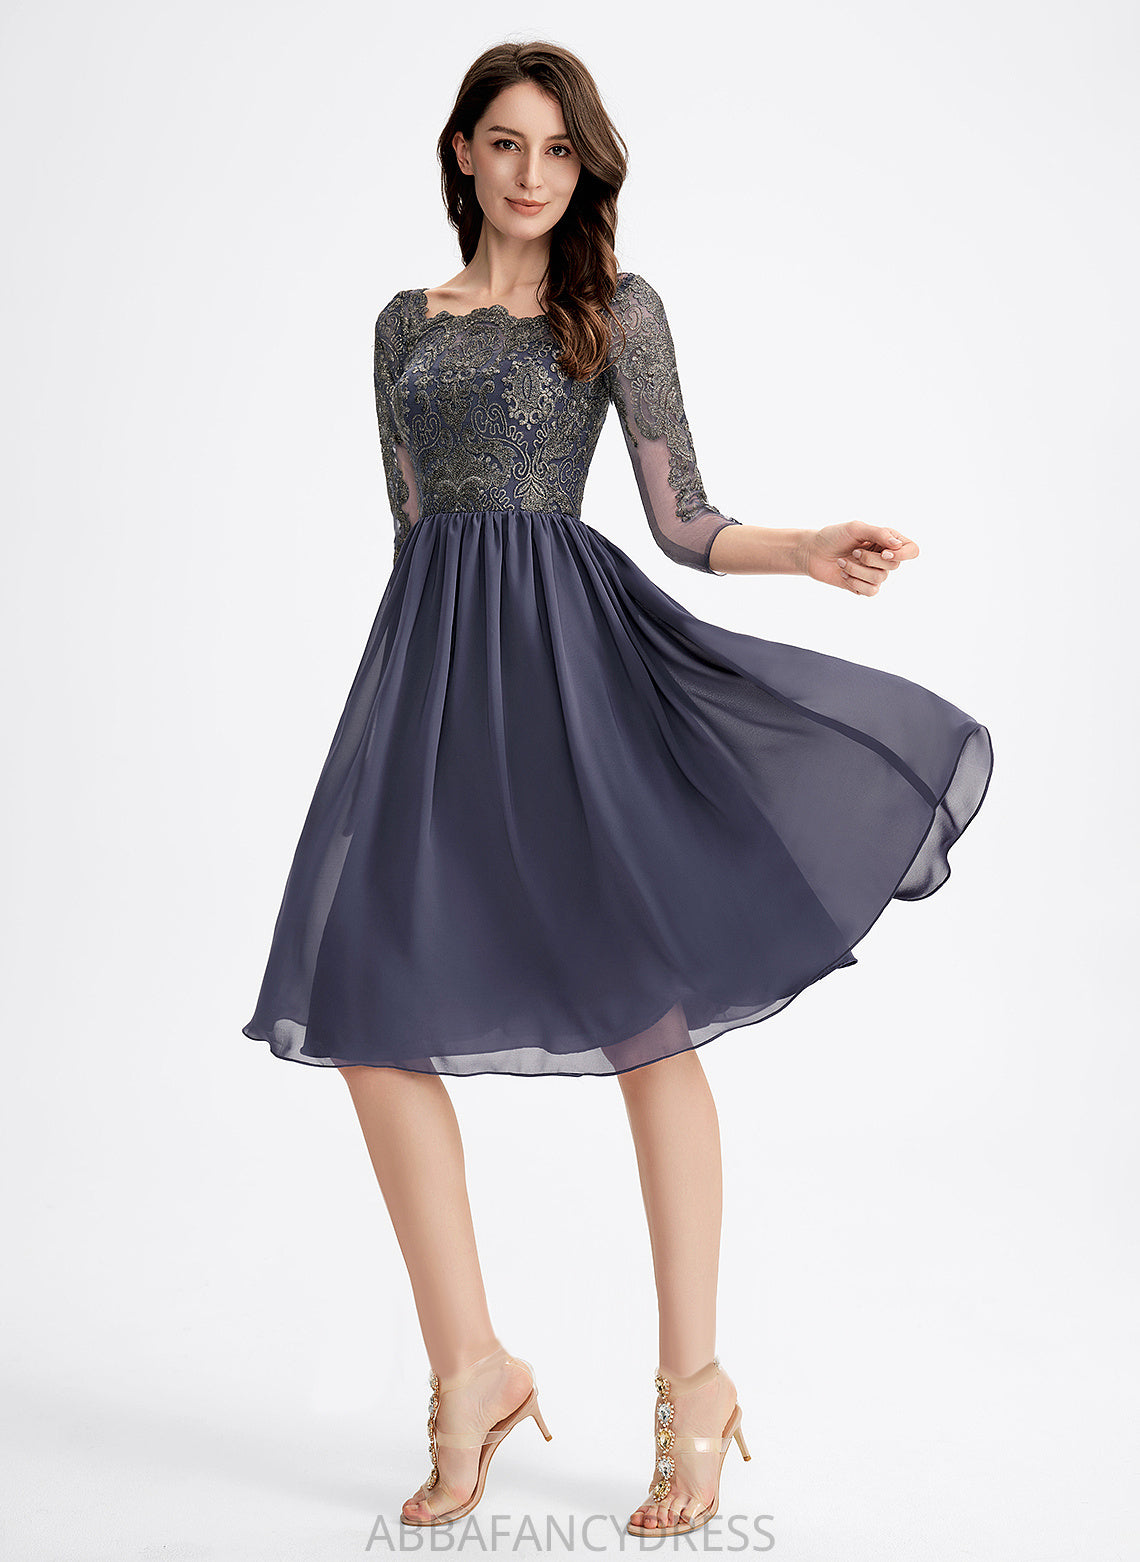 Square Lace Dayami Chiffon A-Line Lace Dress Cocktail Dresses Neckline With Cocktail Knee-Length